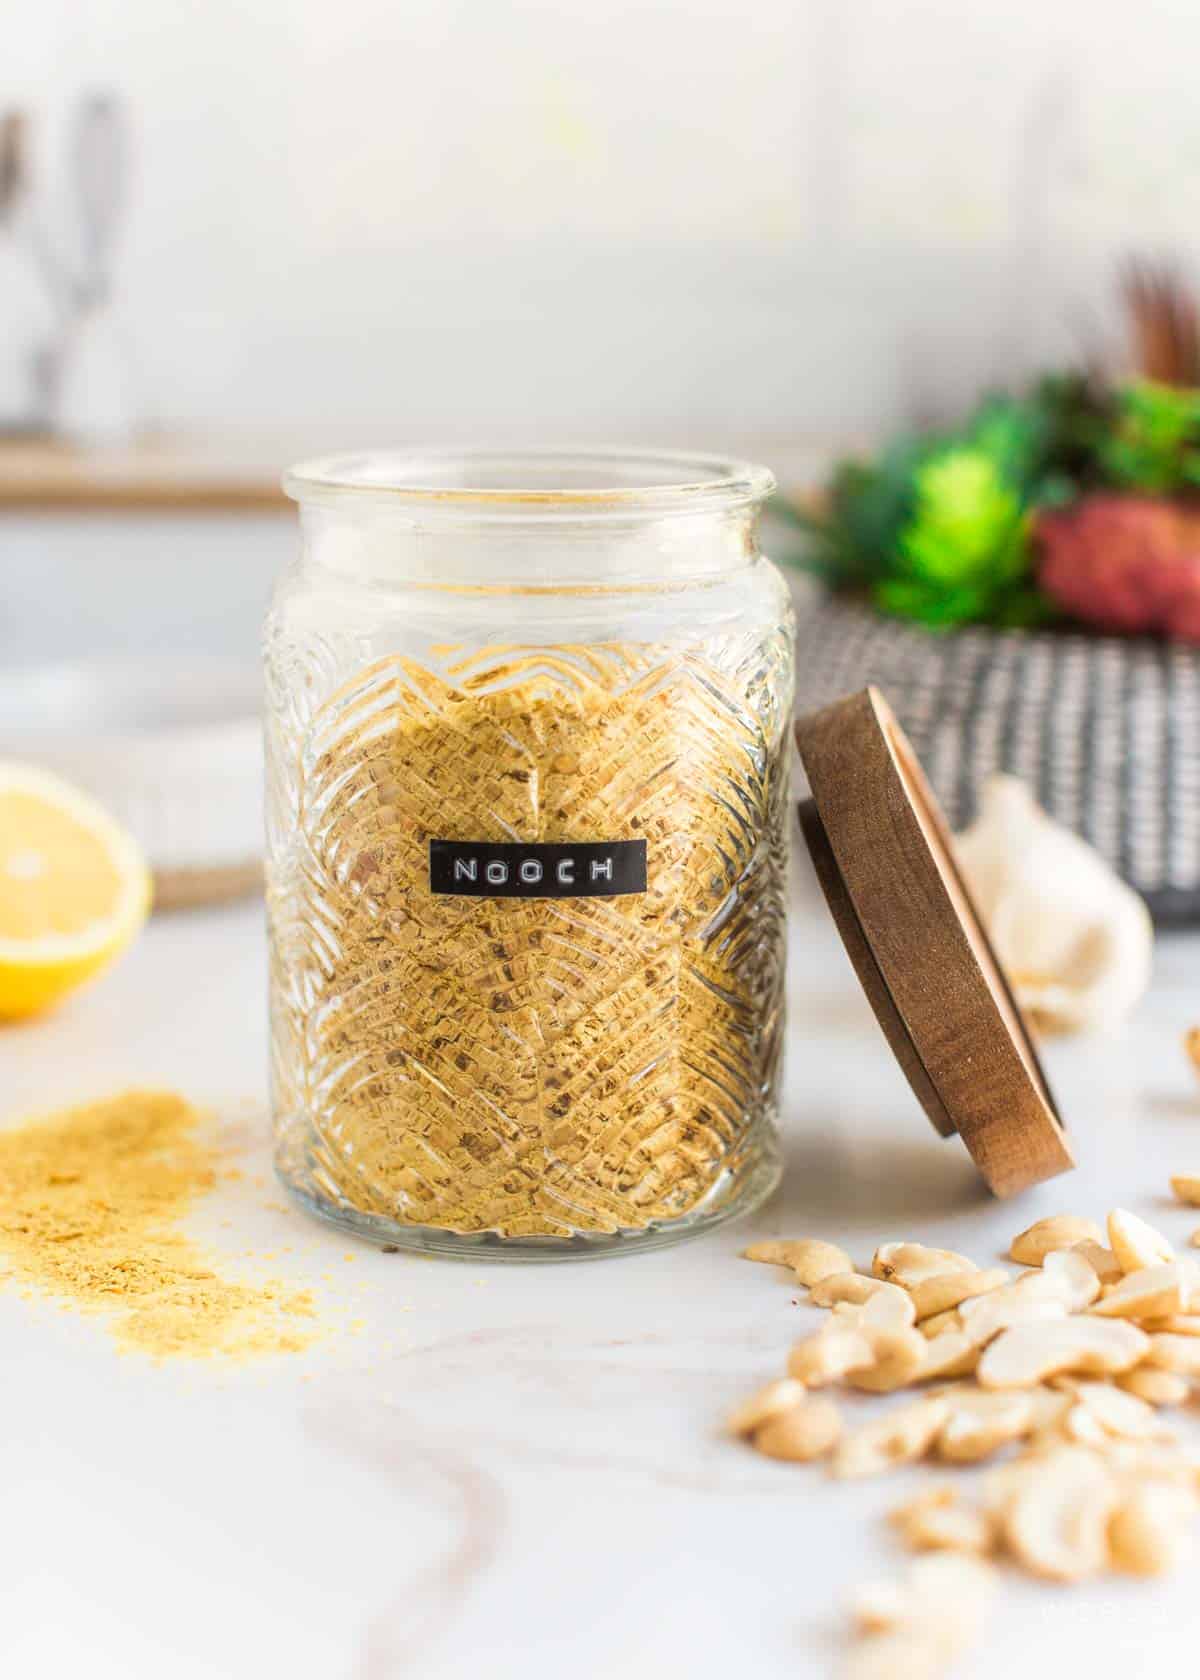 A jar labeled "nooch" and filled with nutritional yeast.